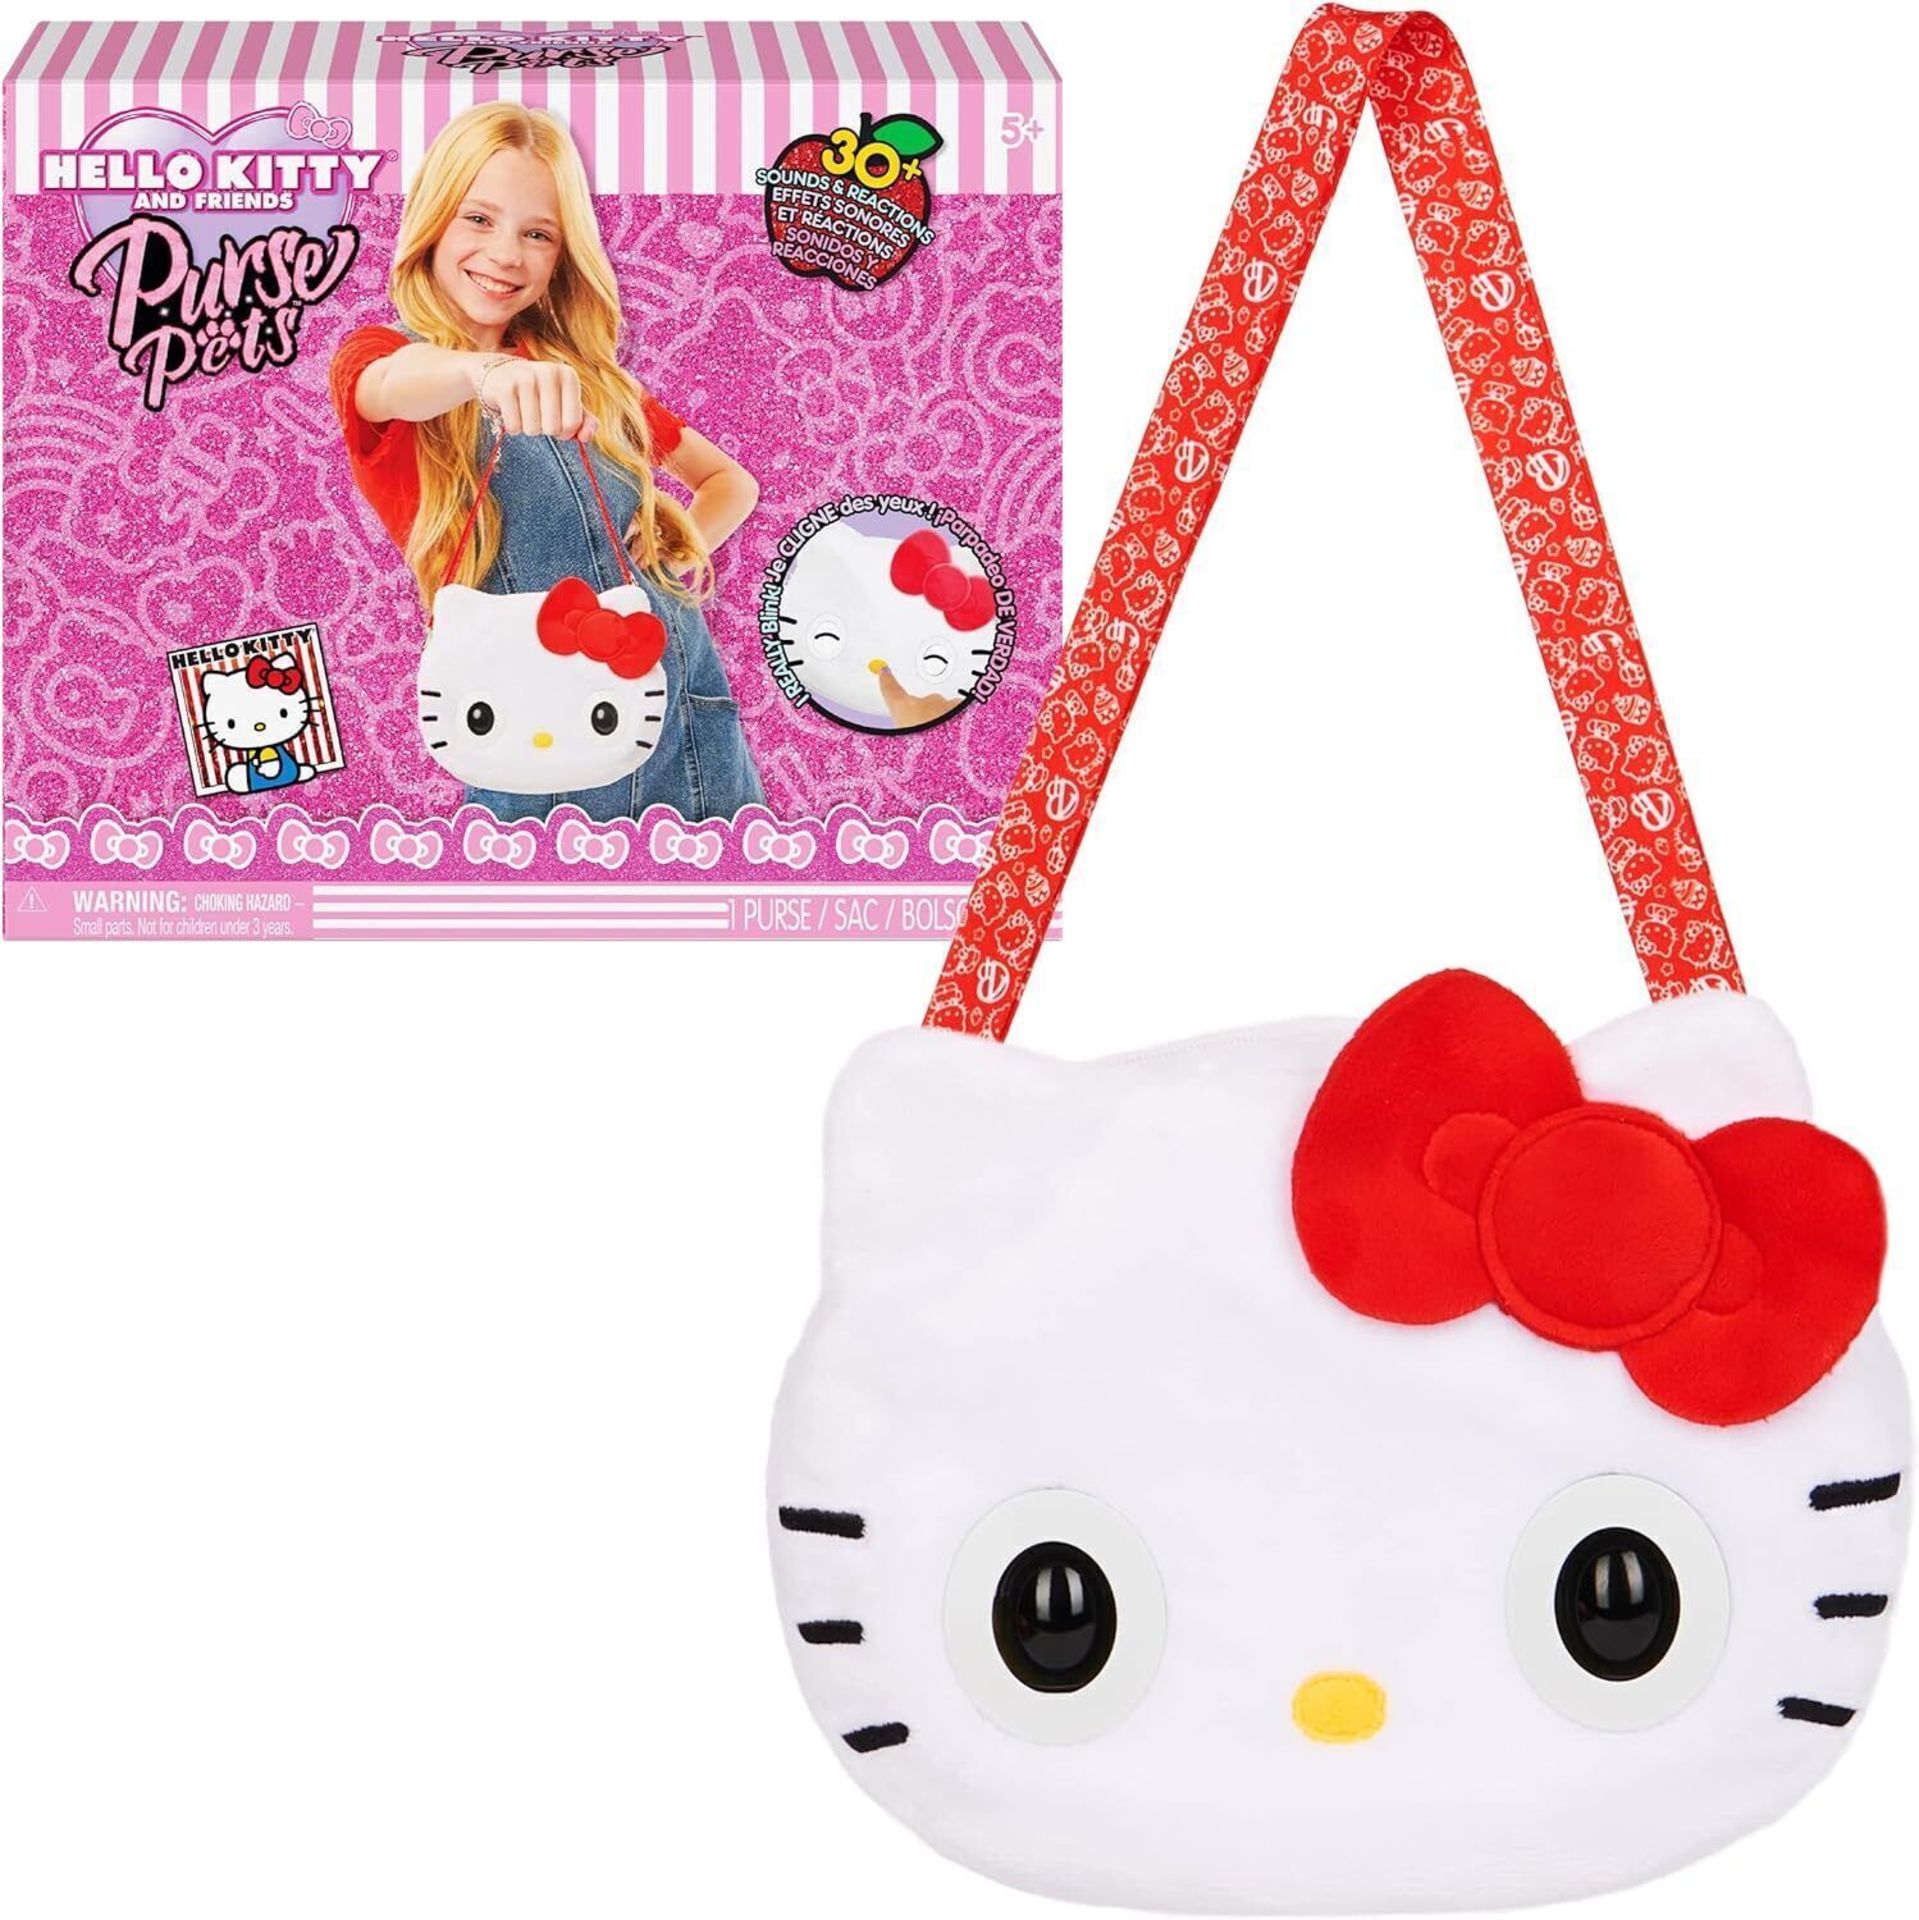 Hello Kitty Purse Pets Brand New (Delivery Band A)